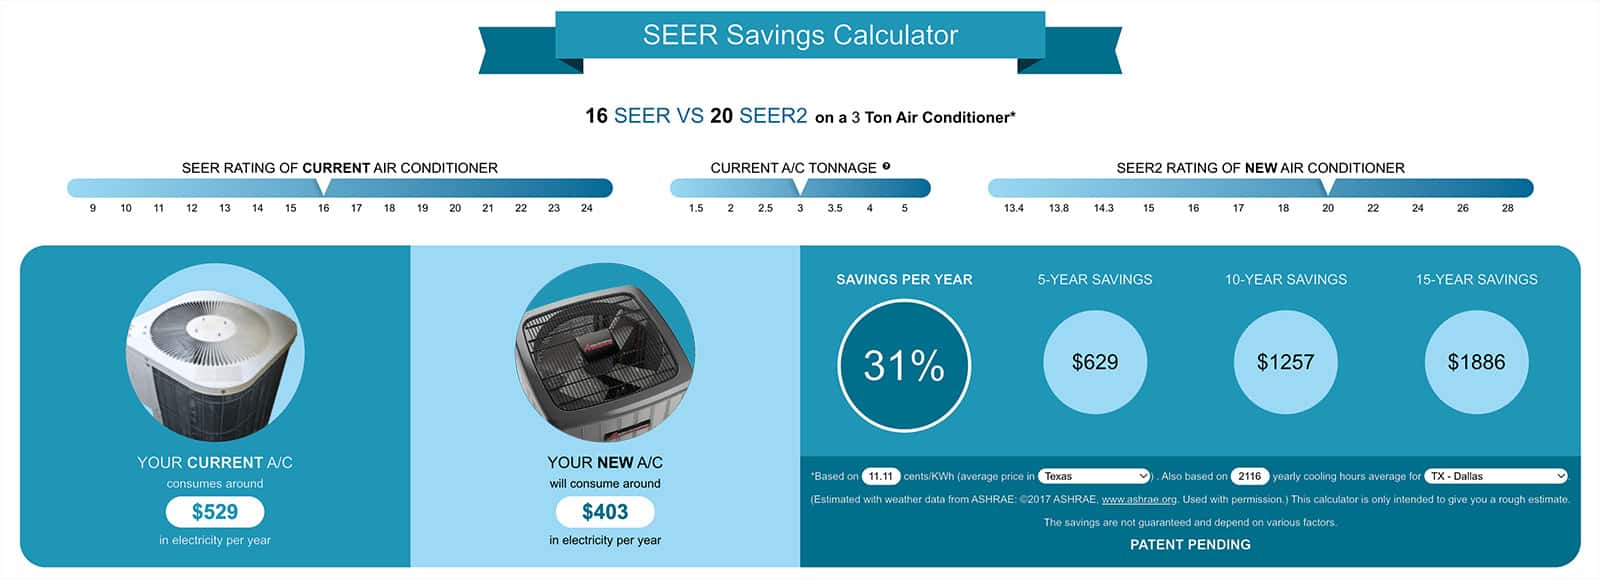 Sample savings wehnupgrading to a higher SEER air conditioner